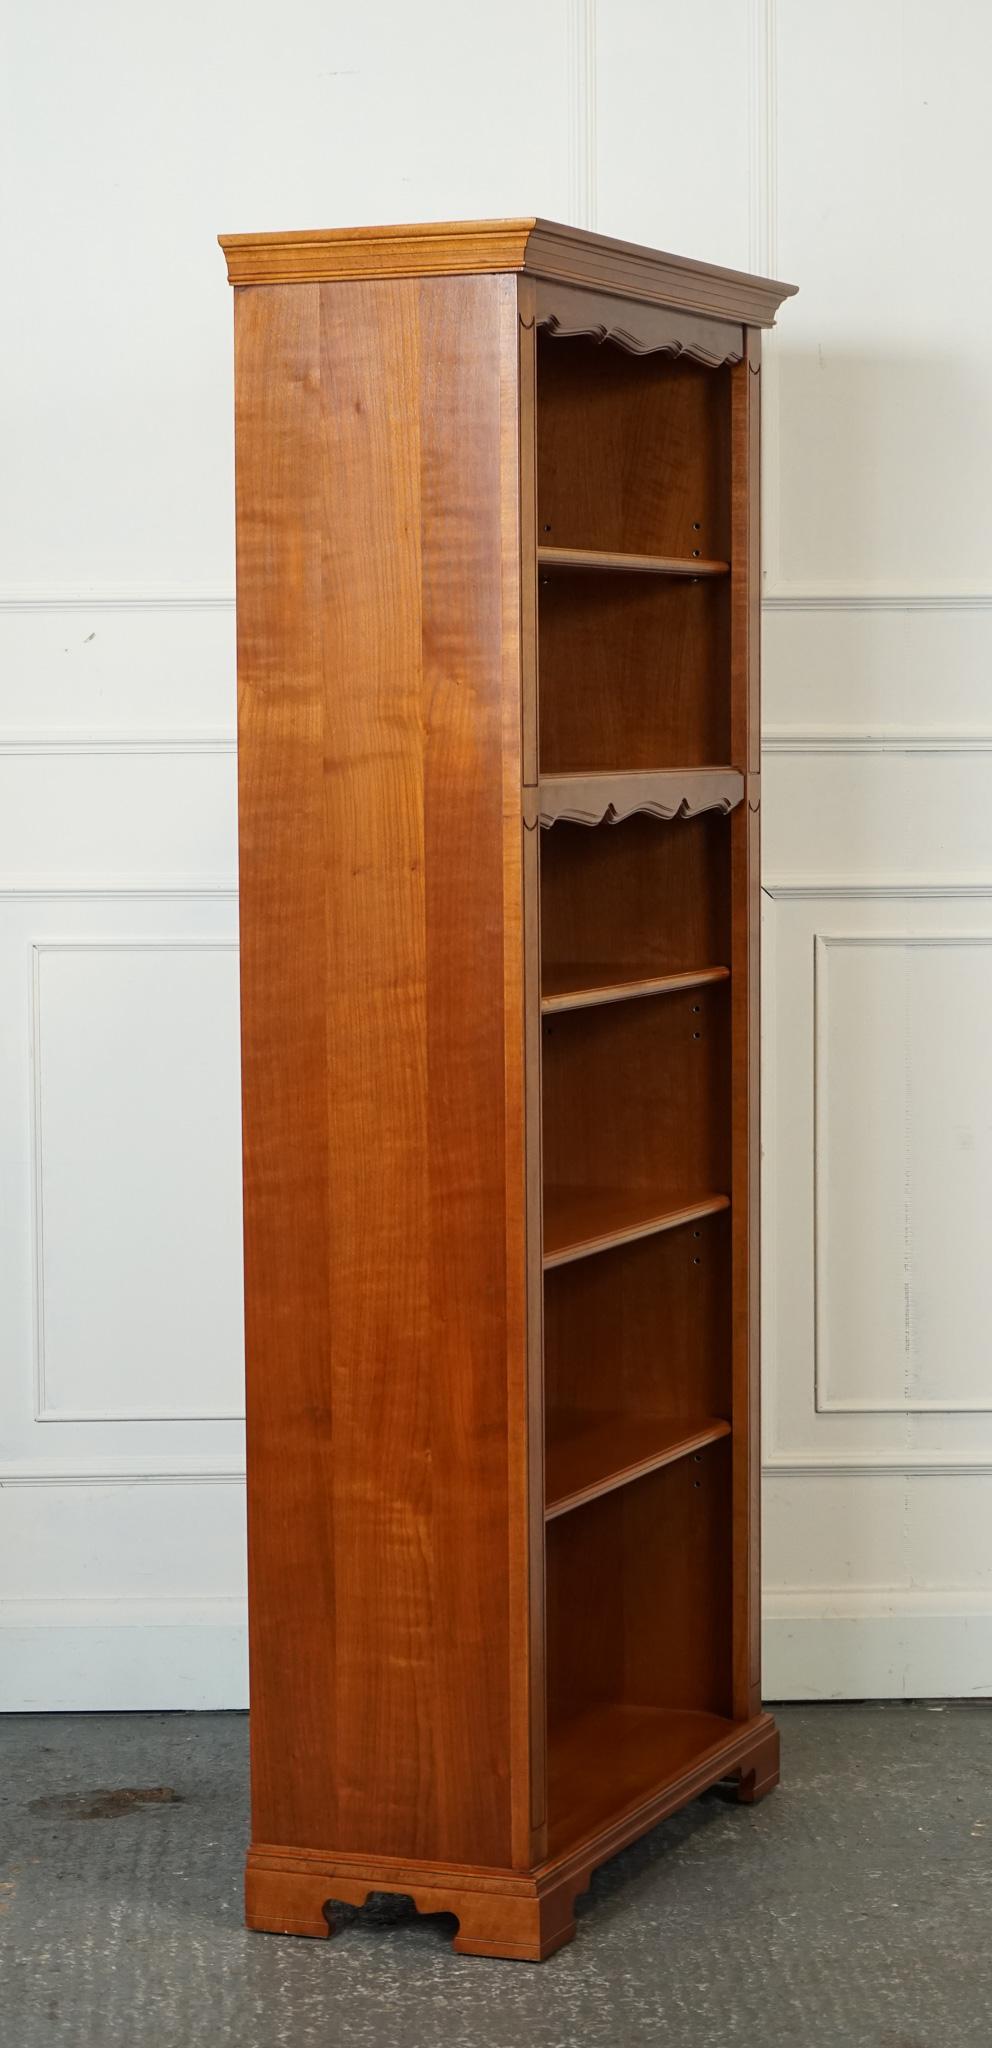 VINTAGE TALL OPEN SOLID BOOKCASE 5 SHELVES MADE BY YOUNGER FURNITURE LONDON j1 For Sale 5